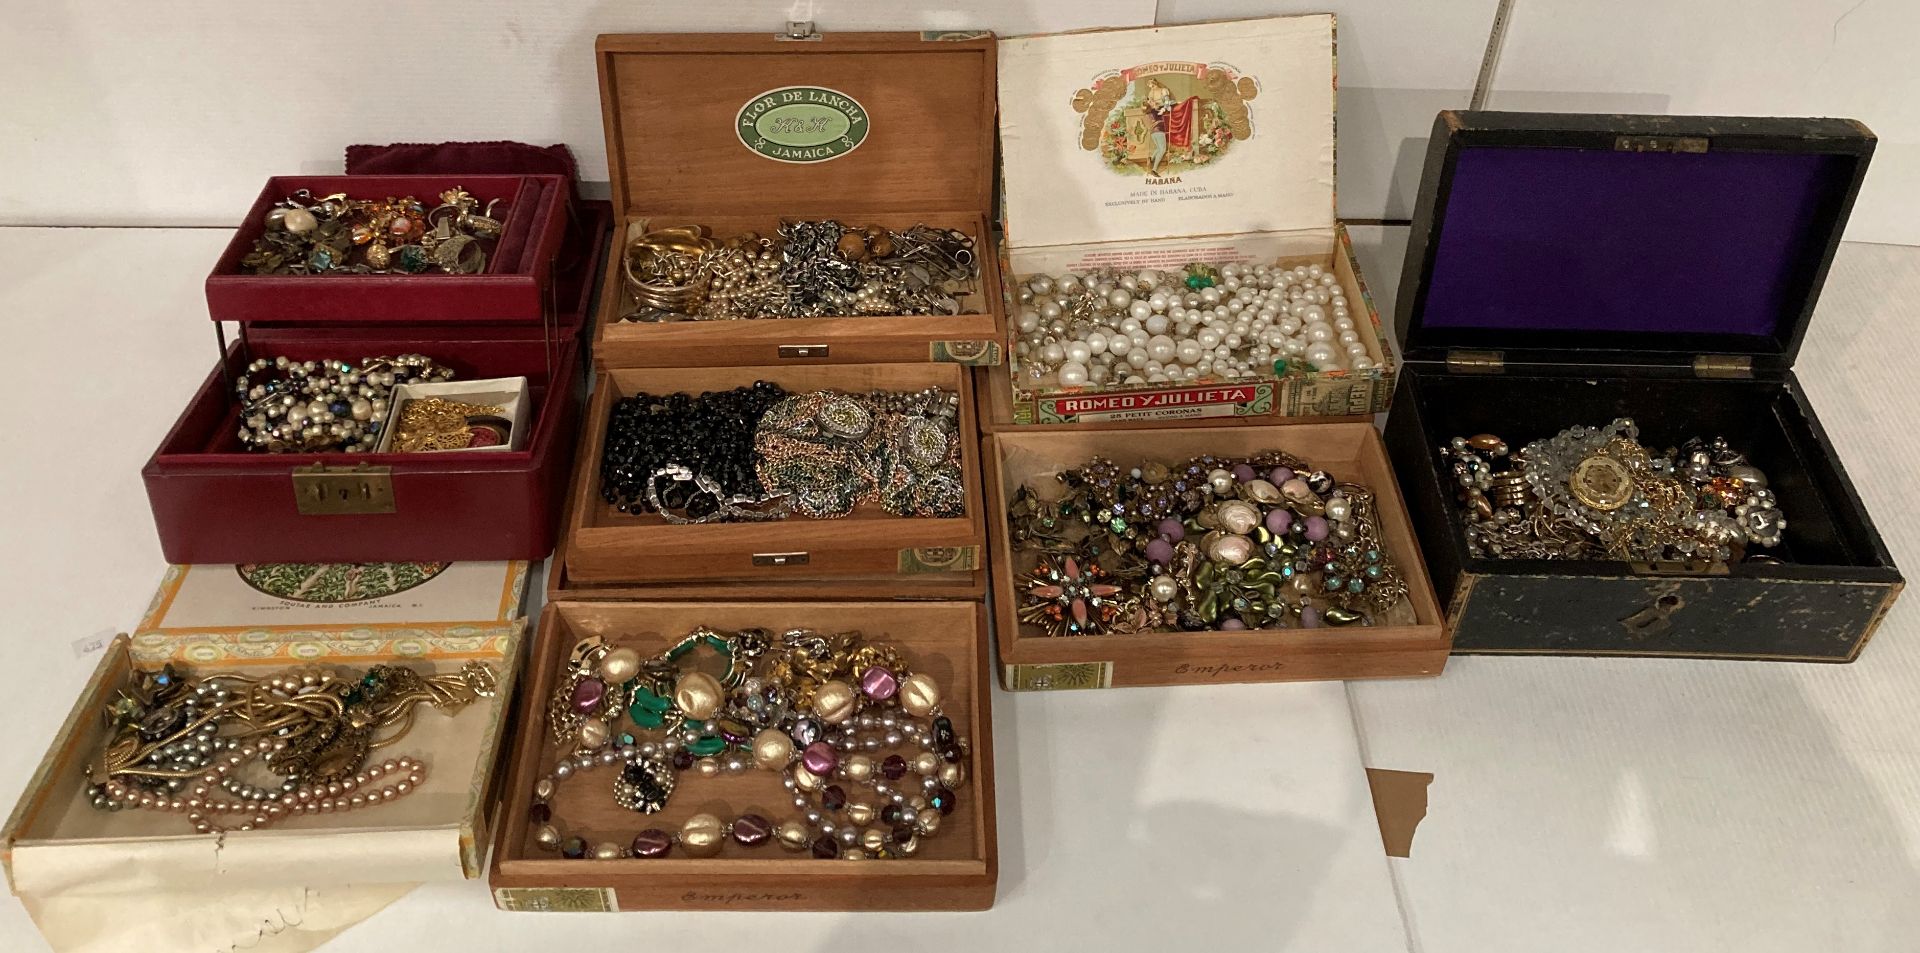 Contents to tray - large quantity of costume jewellery including earrings, necklaces, bracelets,